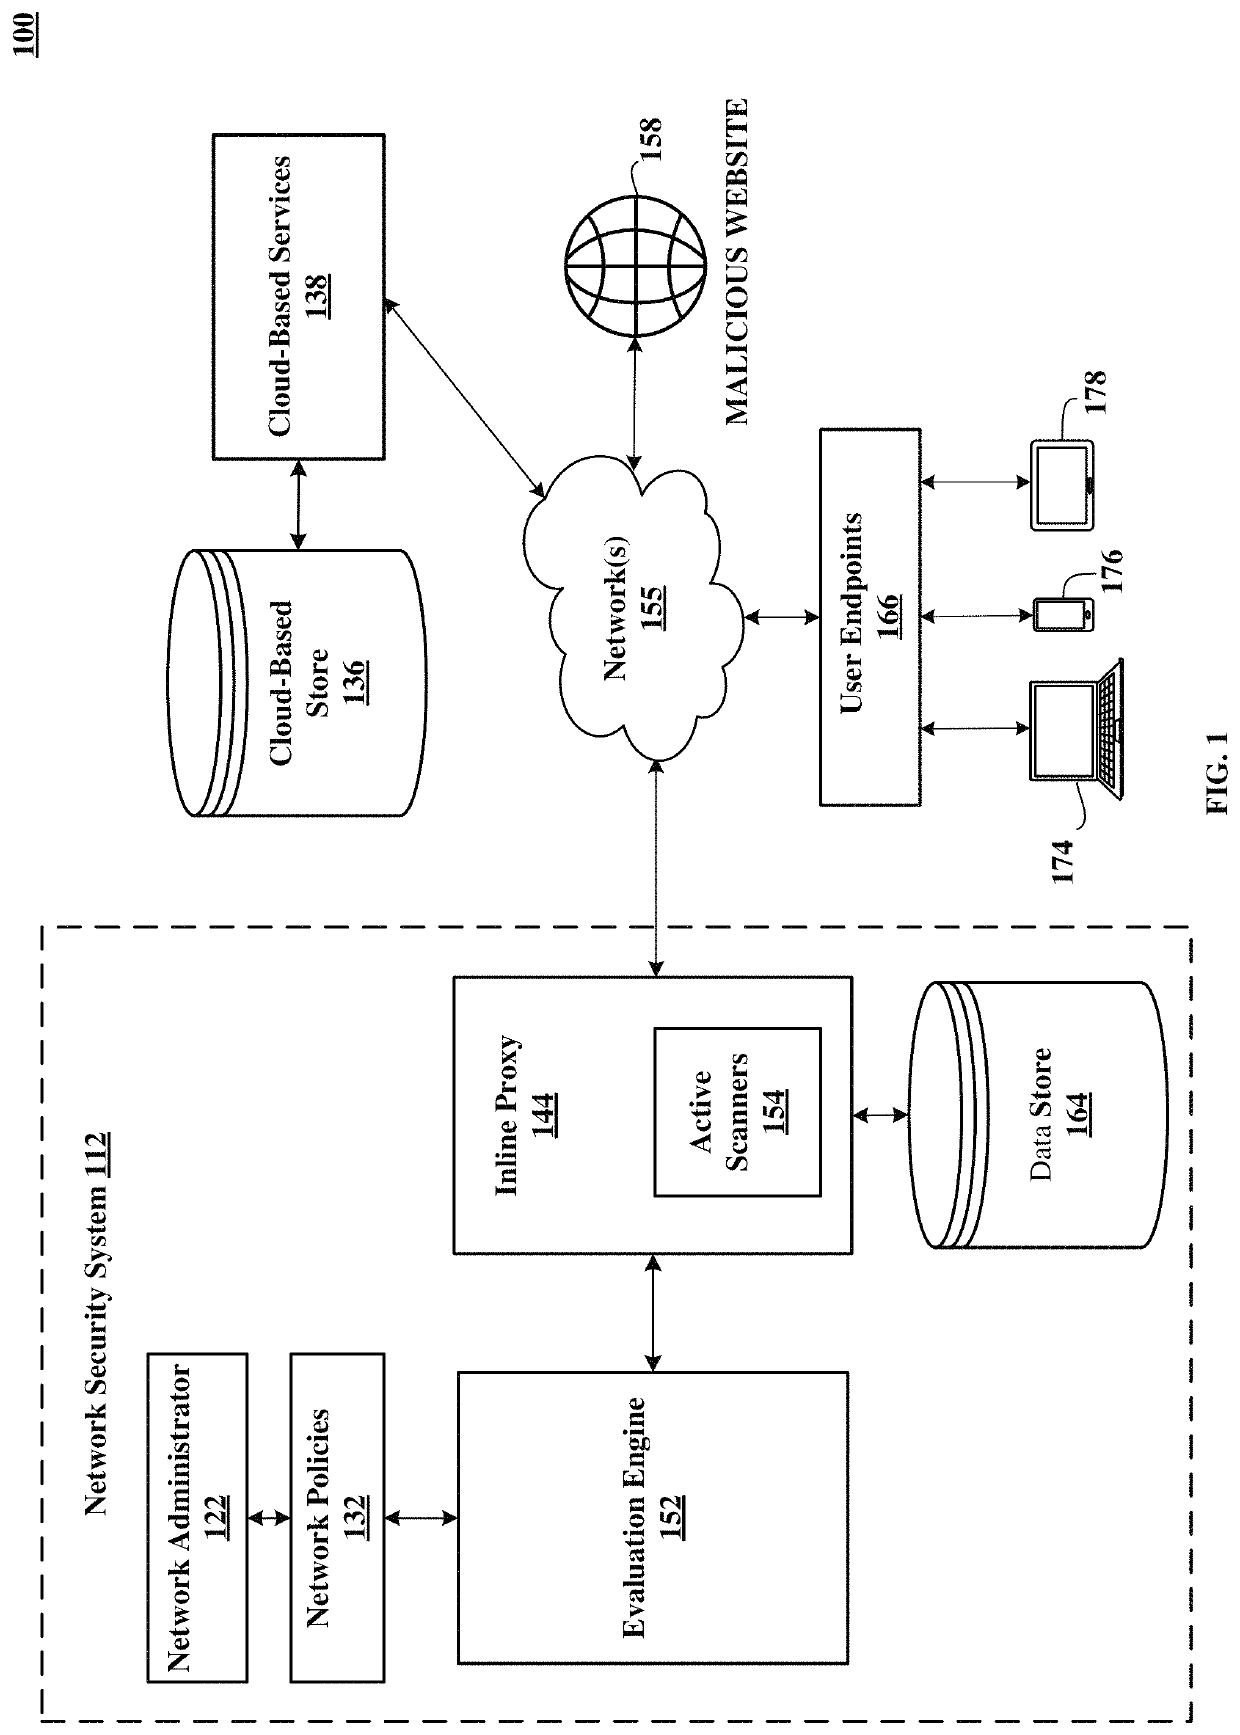 Detecting phishing websites via a machine learning-based system using URL feature hashes, HTML encodings and embedded images of content pages